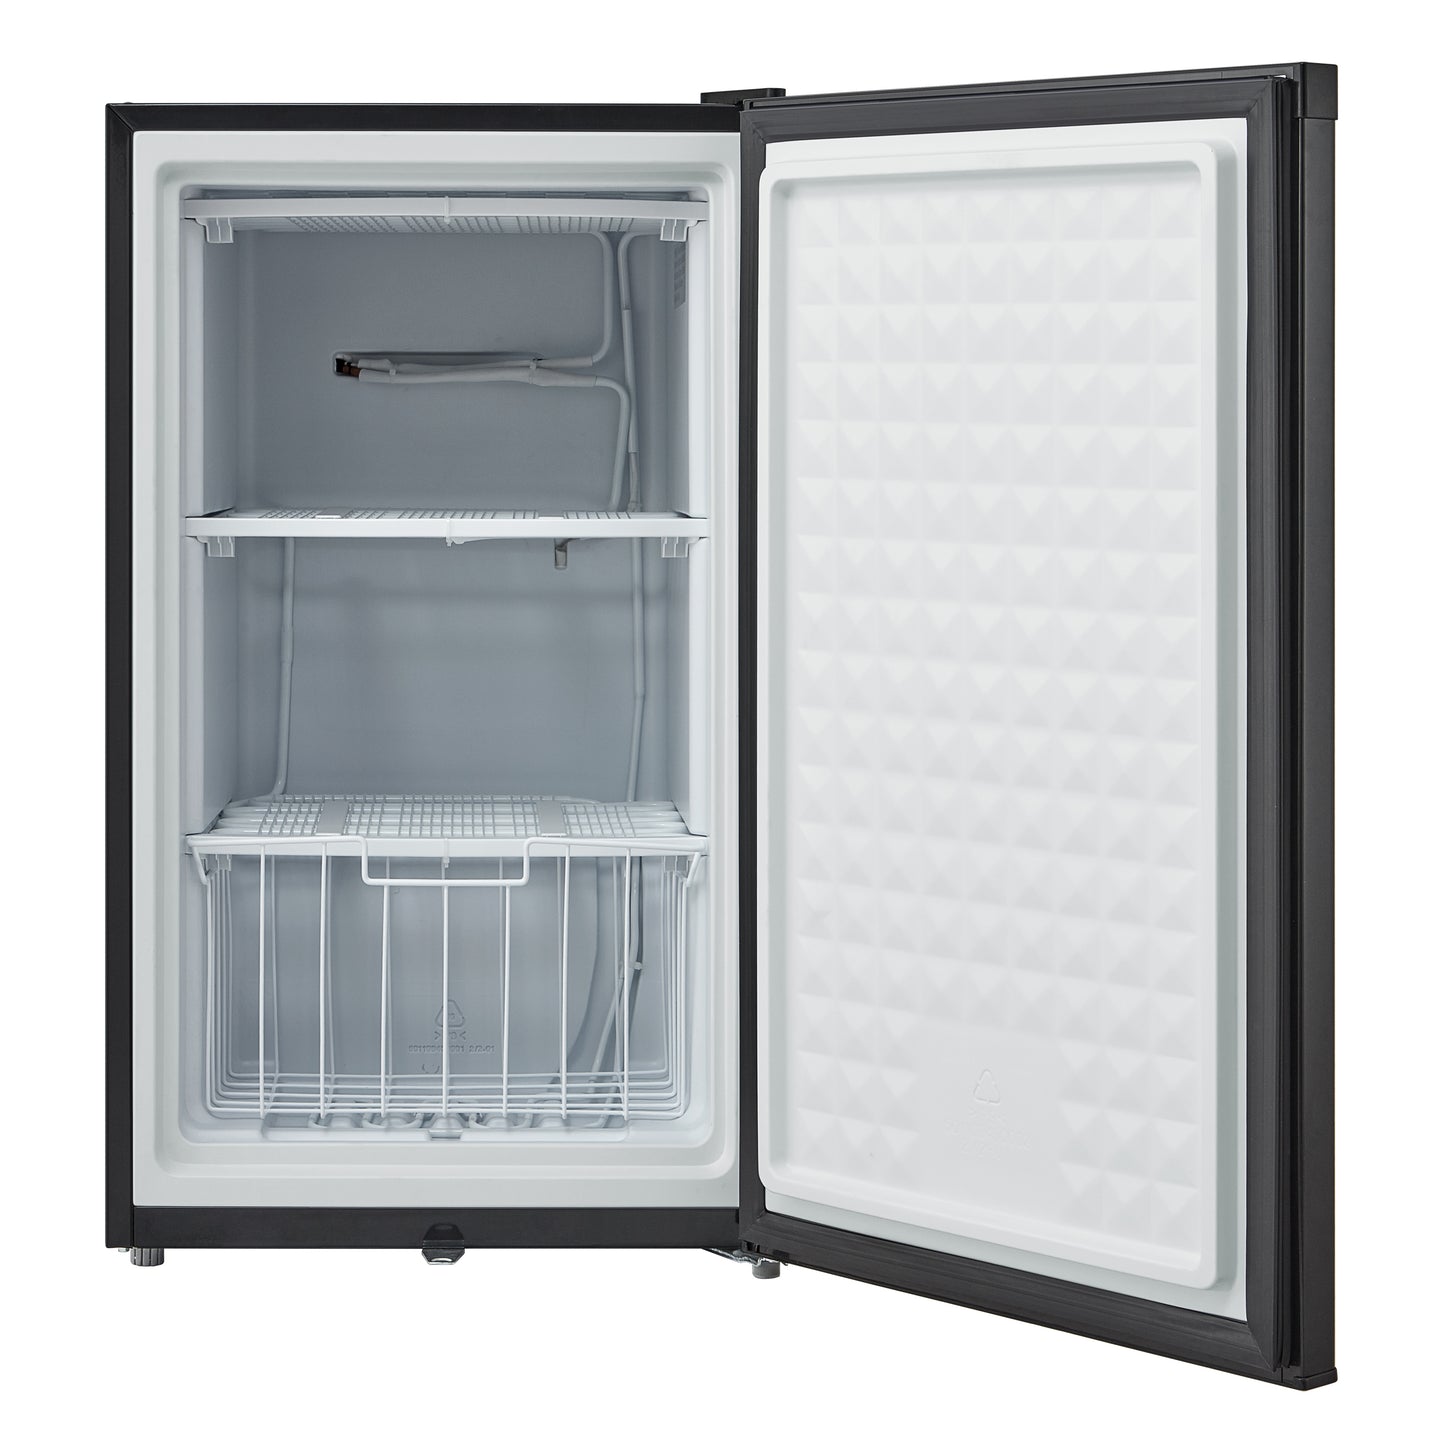 Buy a Whynter 3.0 cu. ft. Energy Star Upright Freezer with Lock - Stainless Steel by Chilled Beverages